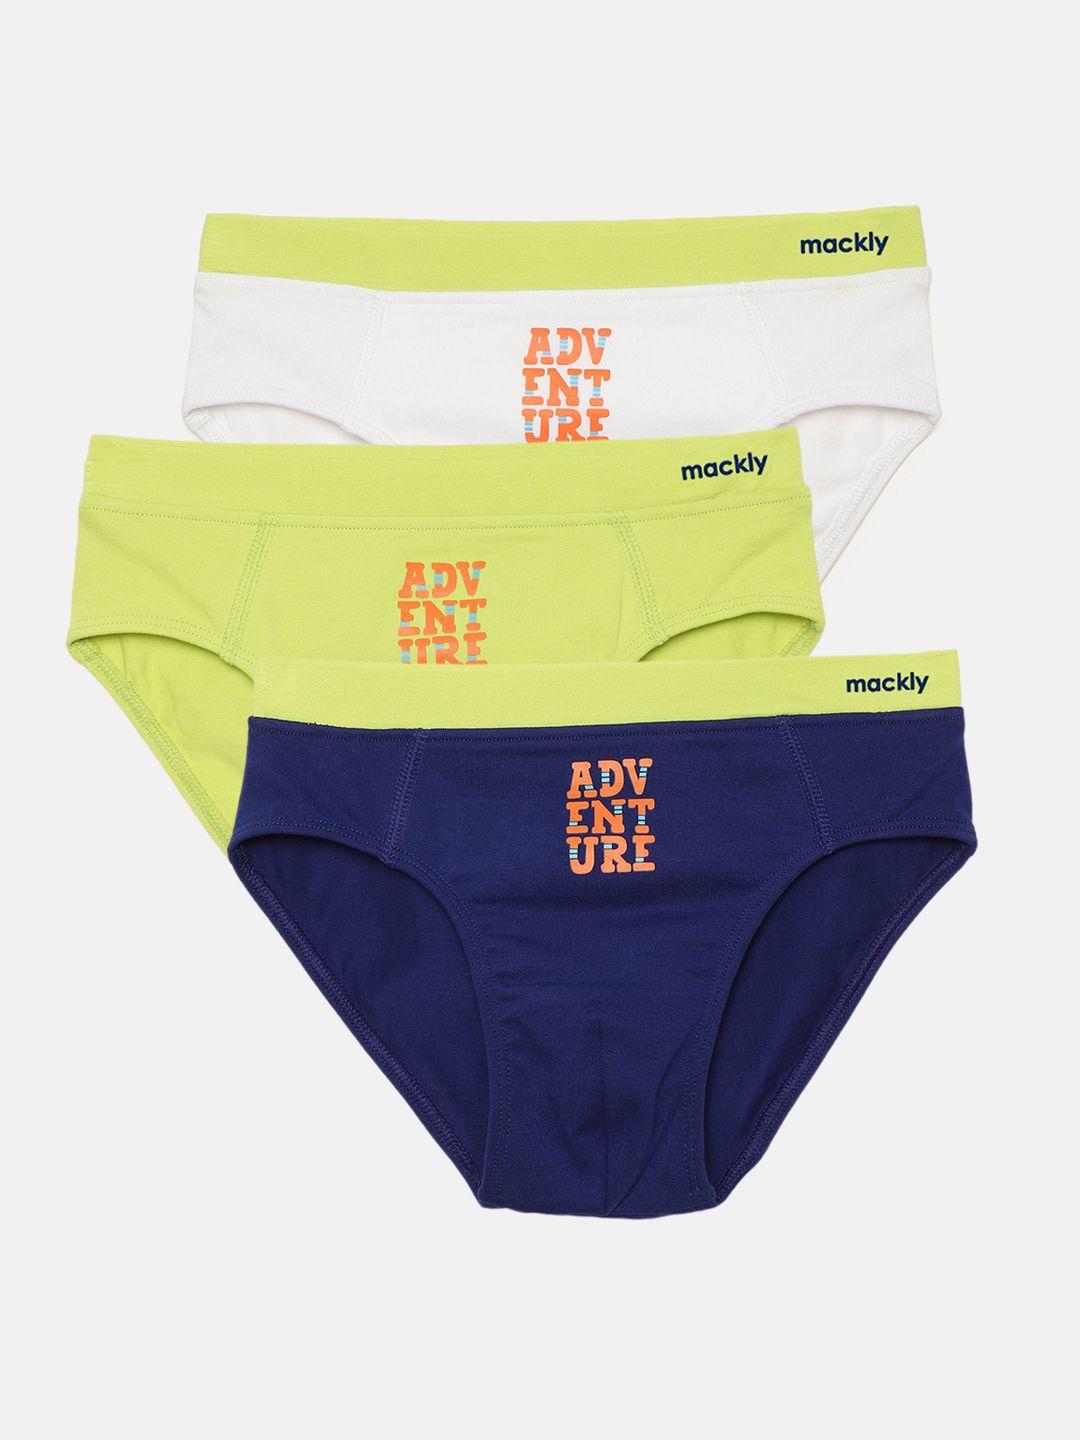 mackly boys pack of 3 self design cotton basic briefs